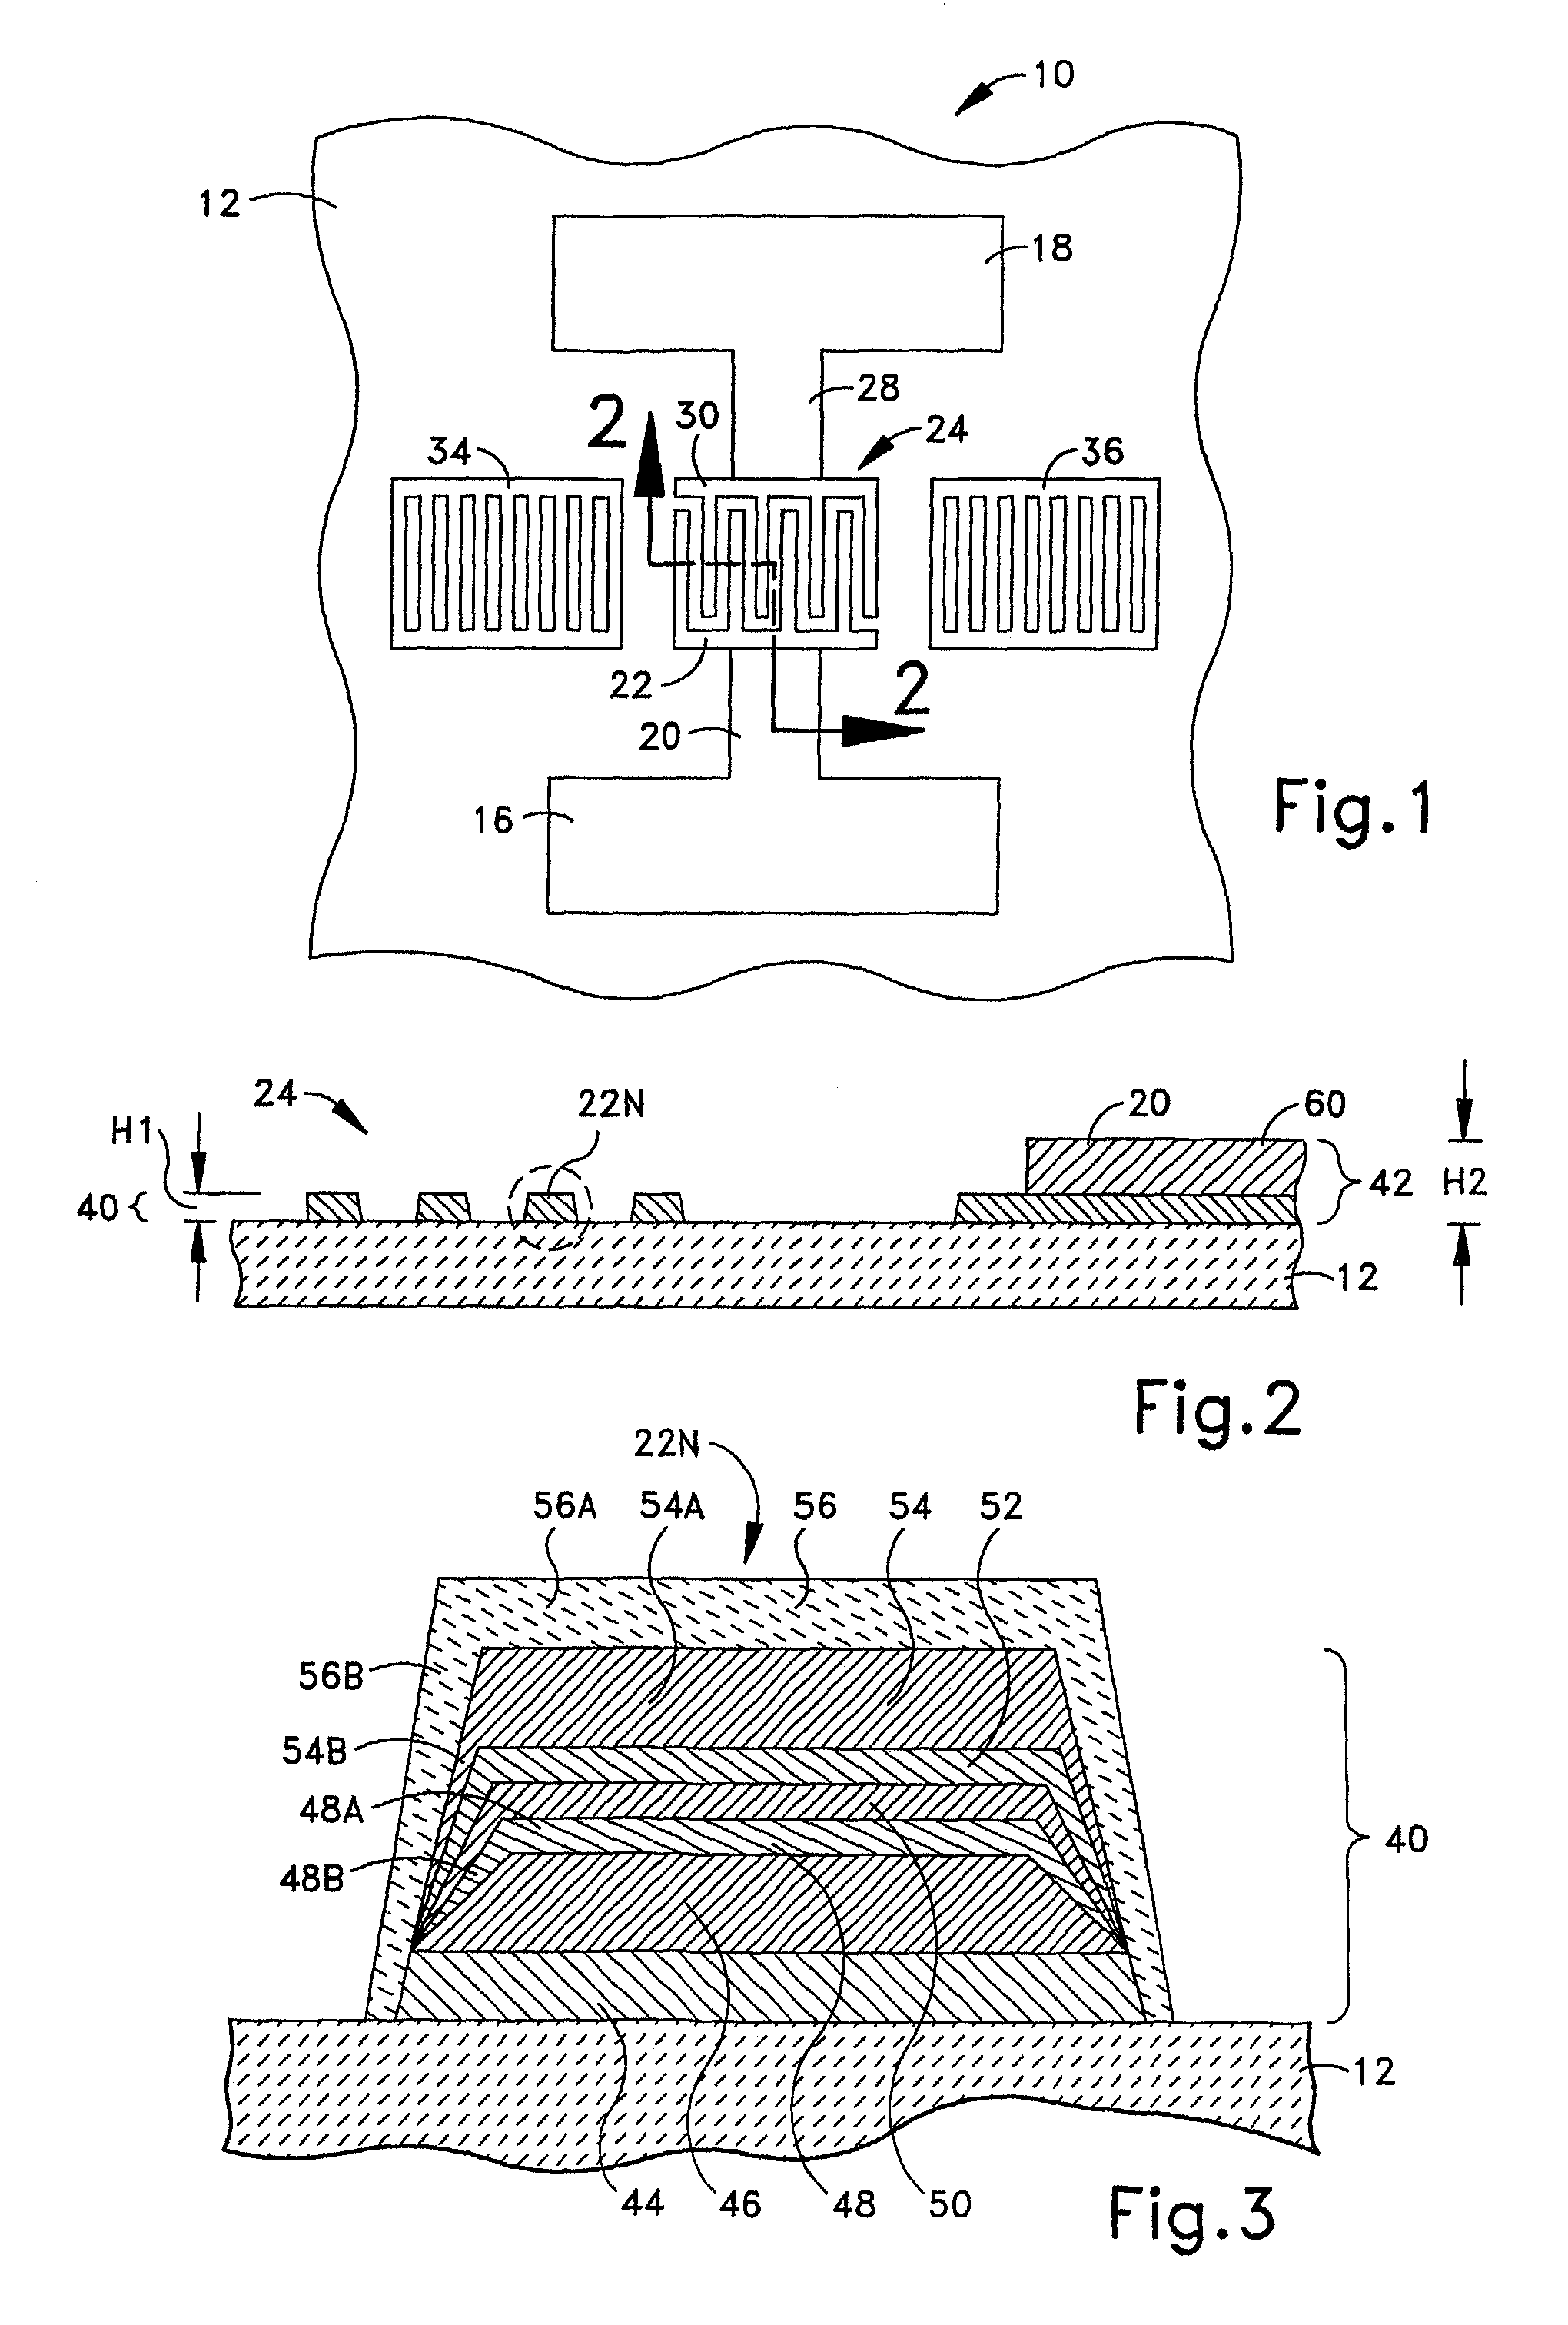 Surface acoustic wave device having improved performance and method of making the device